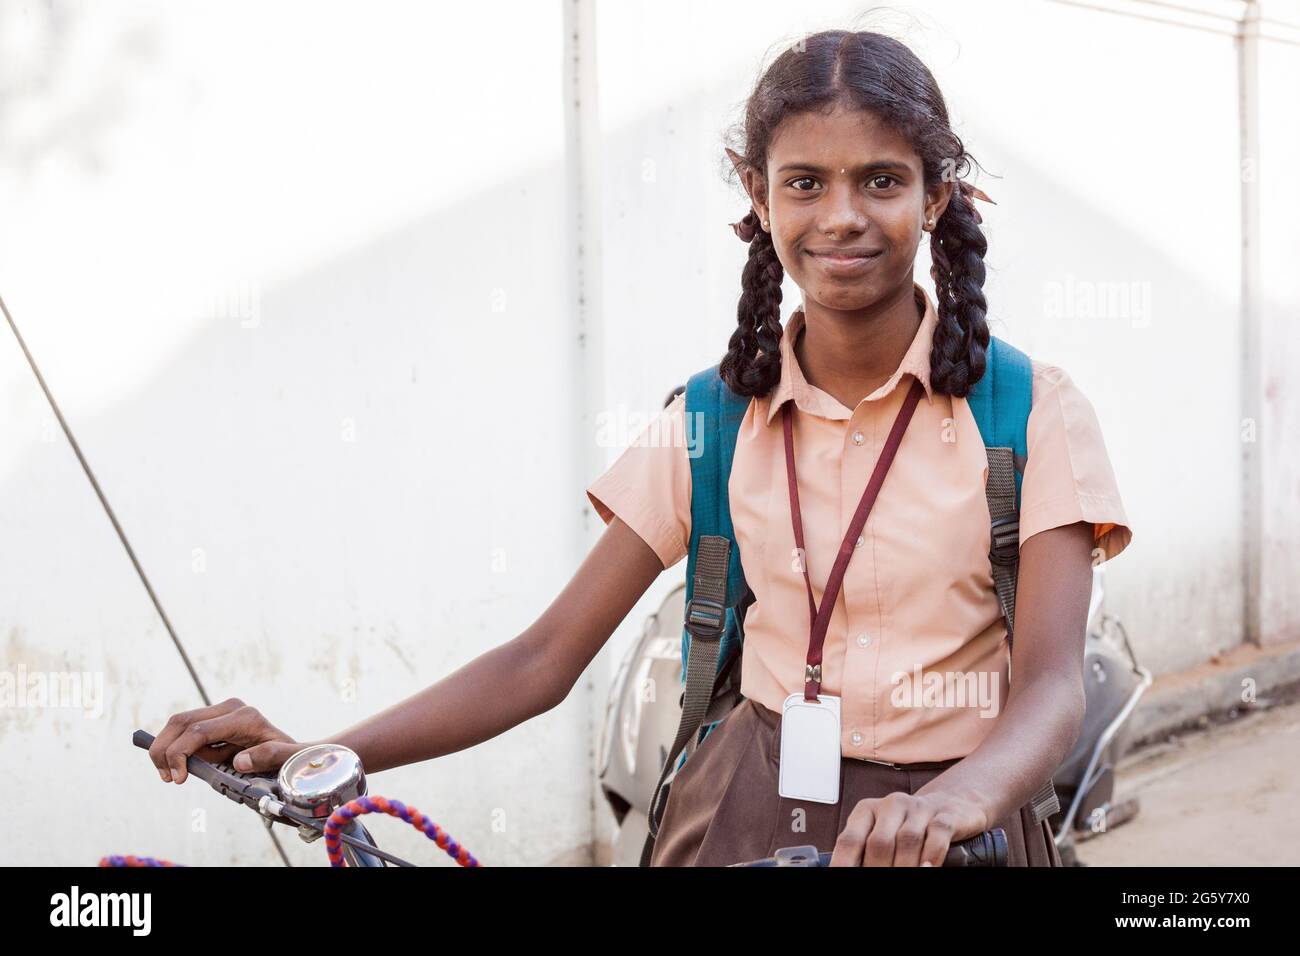 Pretty Indian schoolgirl in uniform with backpack sits on bicycle smiling happily for photo, Puducherry, Tamil Nadu, India Stock Photo